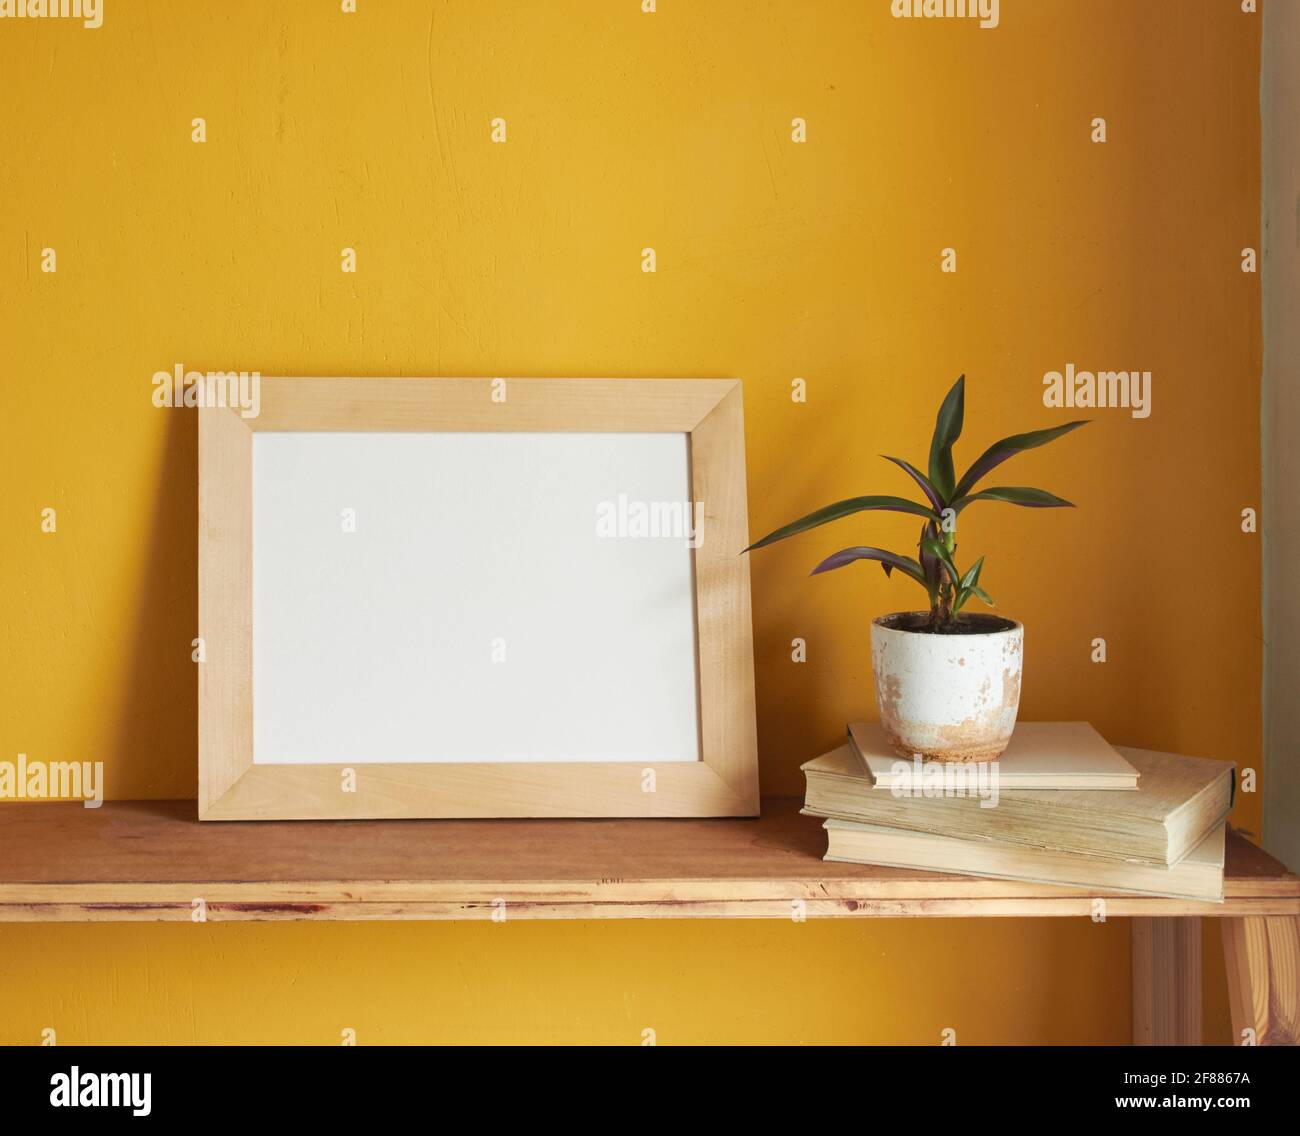 Wooden picture frame mockup. Flowerpot on a pile of books on an old wooden shelf. Composition on a yellow wall background Stock Photo